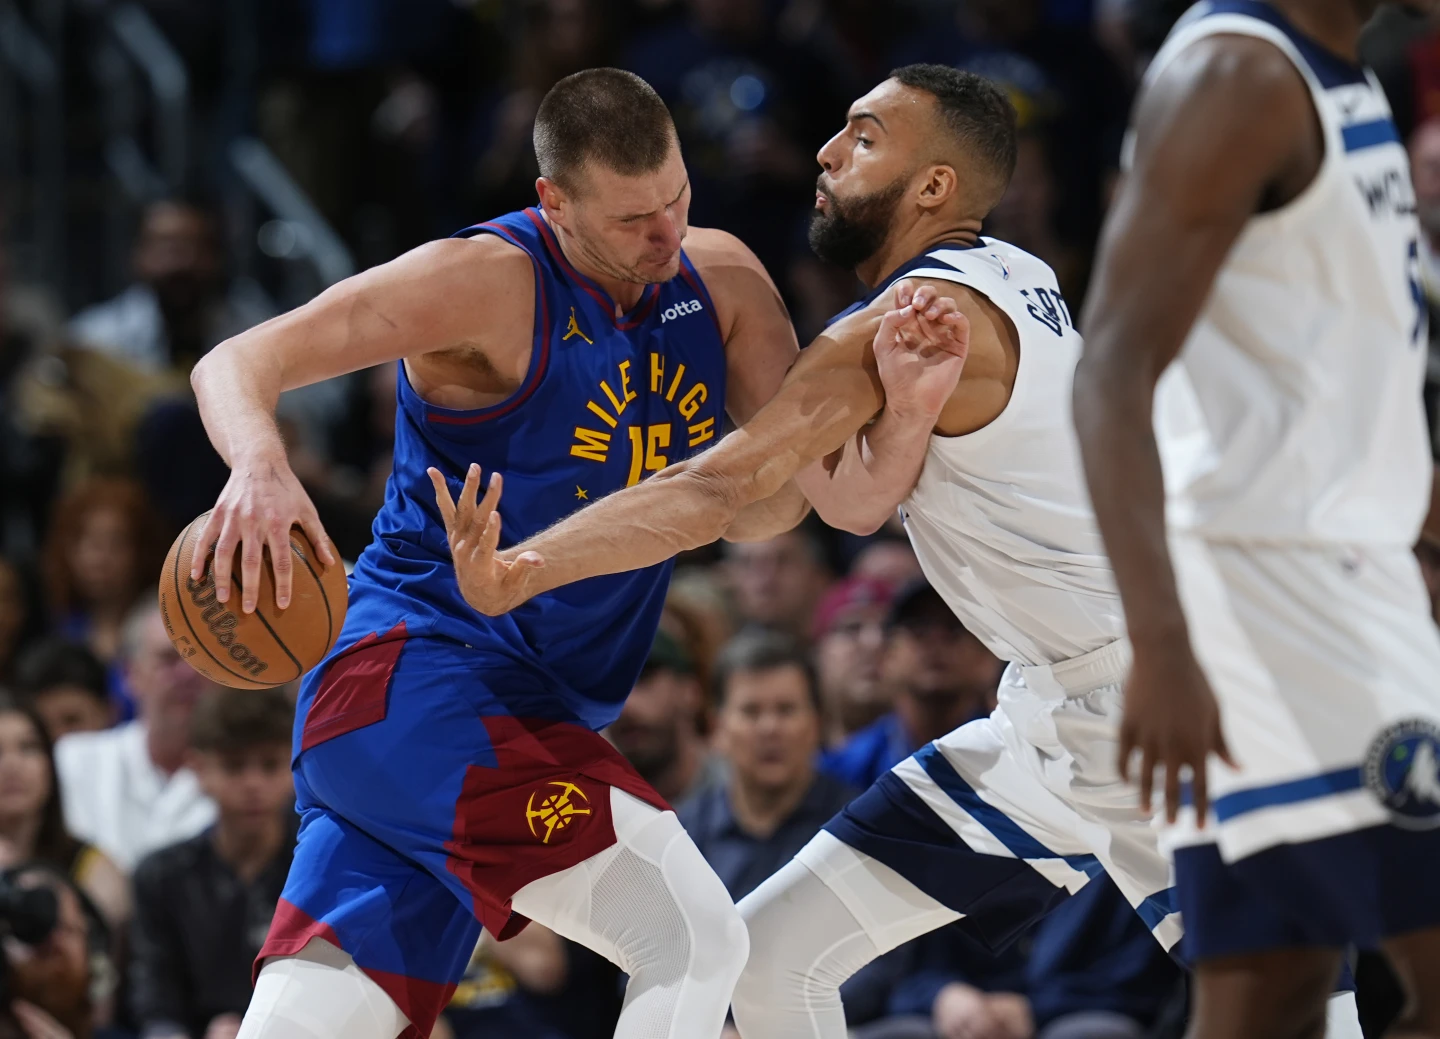 The reigning NBA champions, Nuggets, are facing an uphill battle in the Western Conference Semifinals after Game 1 loss to Timberwolves.